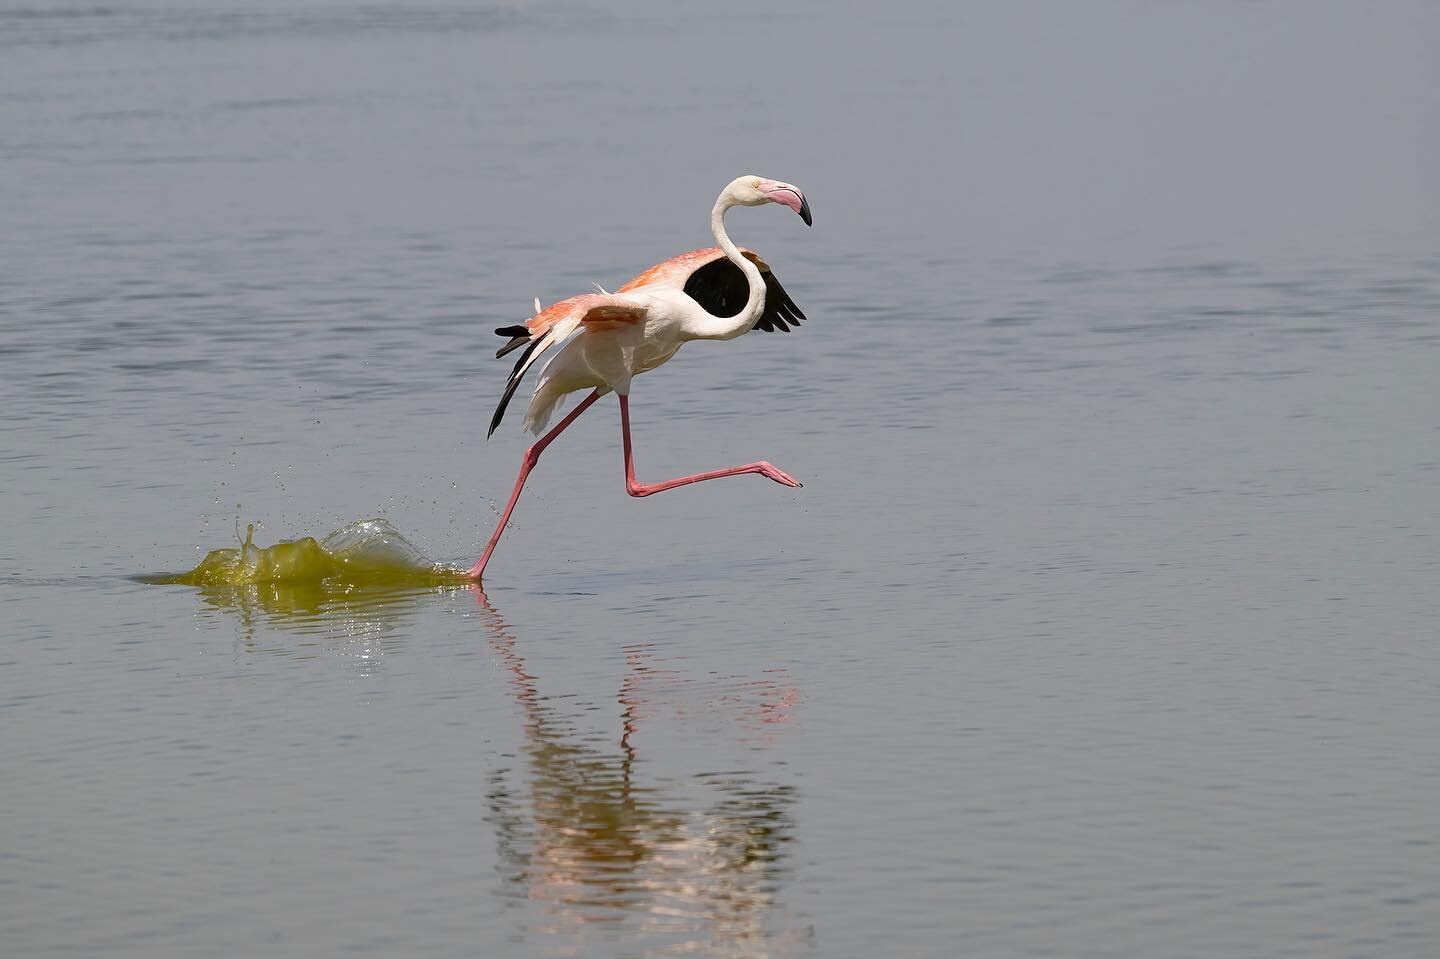 A flamingo walking across the water during its landing in a pond. Amboseli National Park, Kenya. The beauty of Africa.